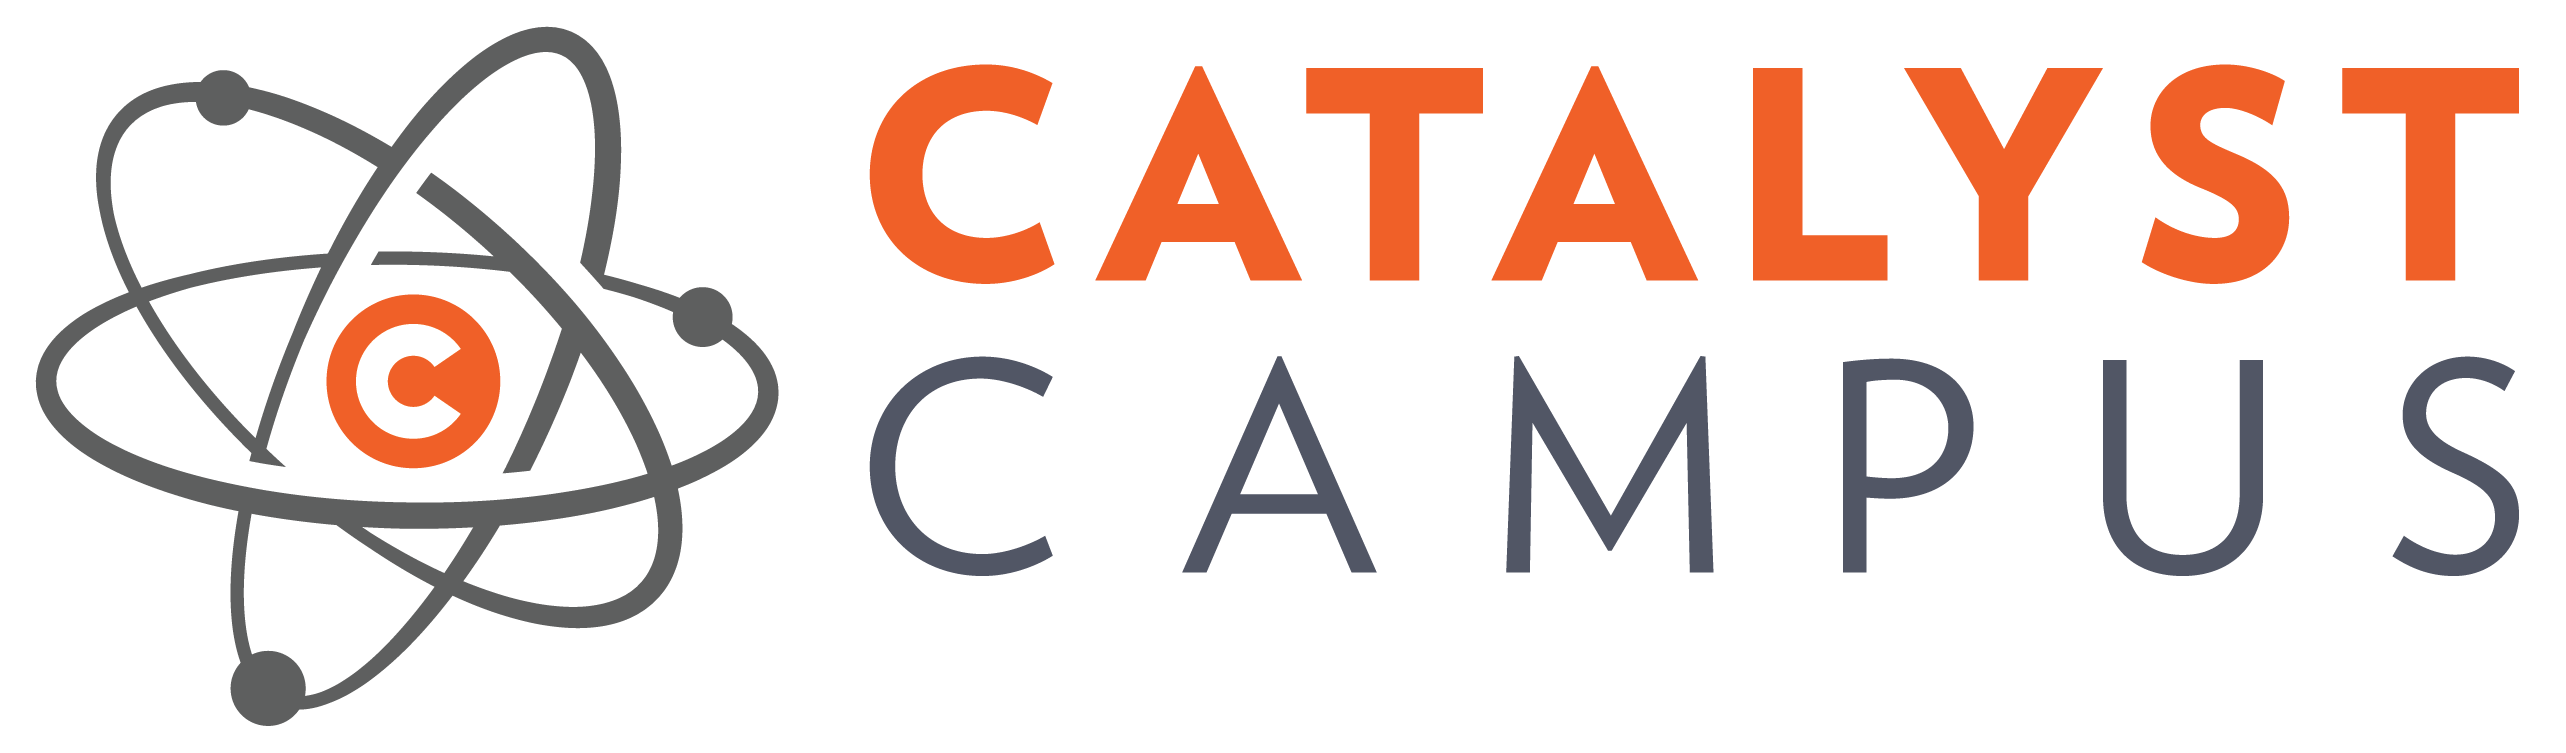 Catalyst Campus for Technology & Innovation (CCTI) Logo